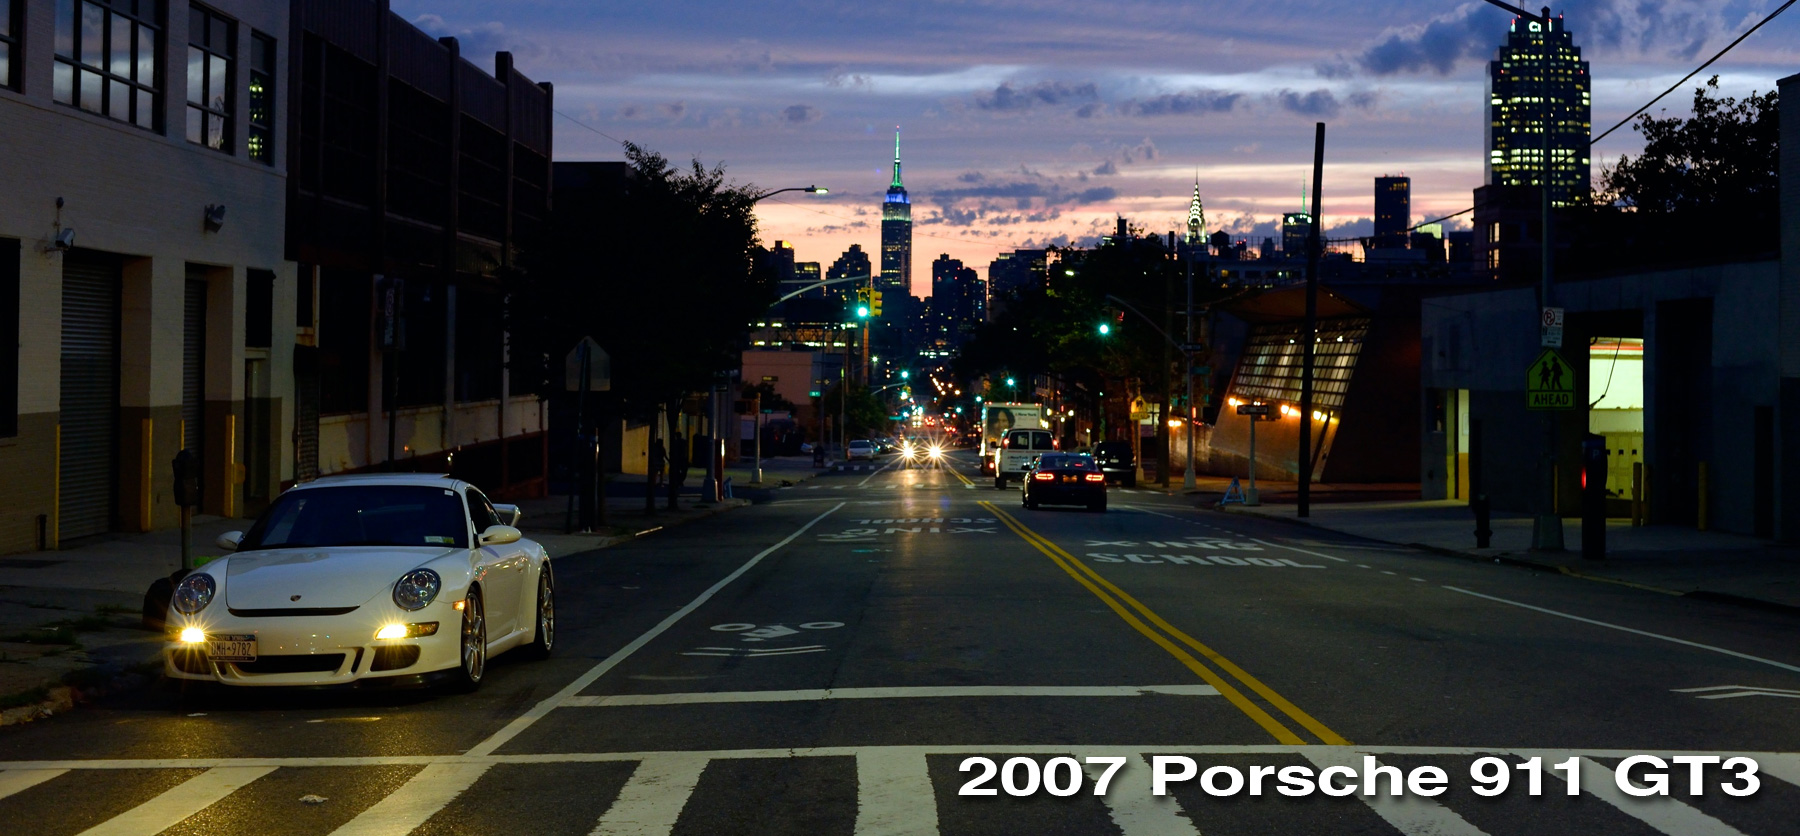 A white 997 GT3 on 42nd street in queens with the empire state building visible.